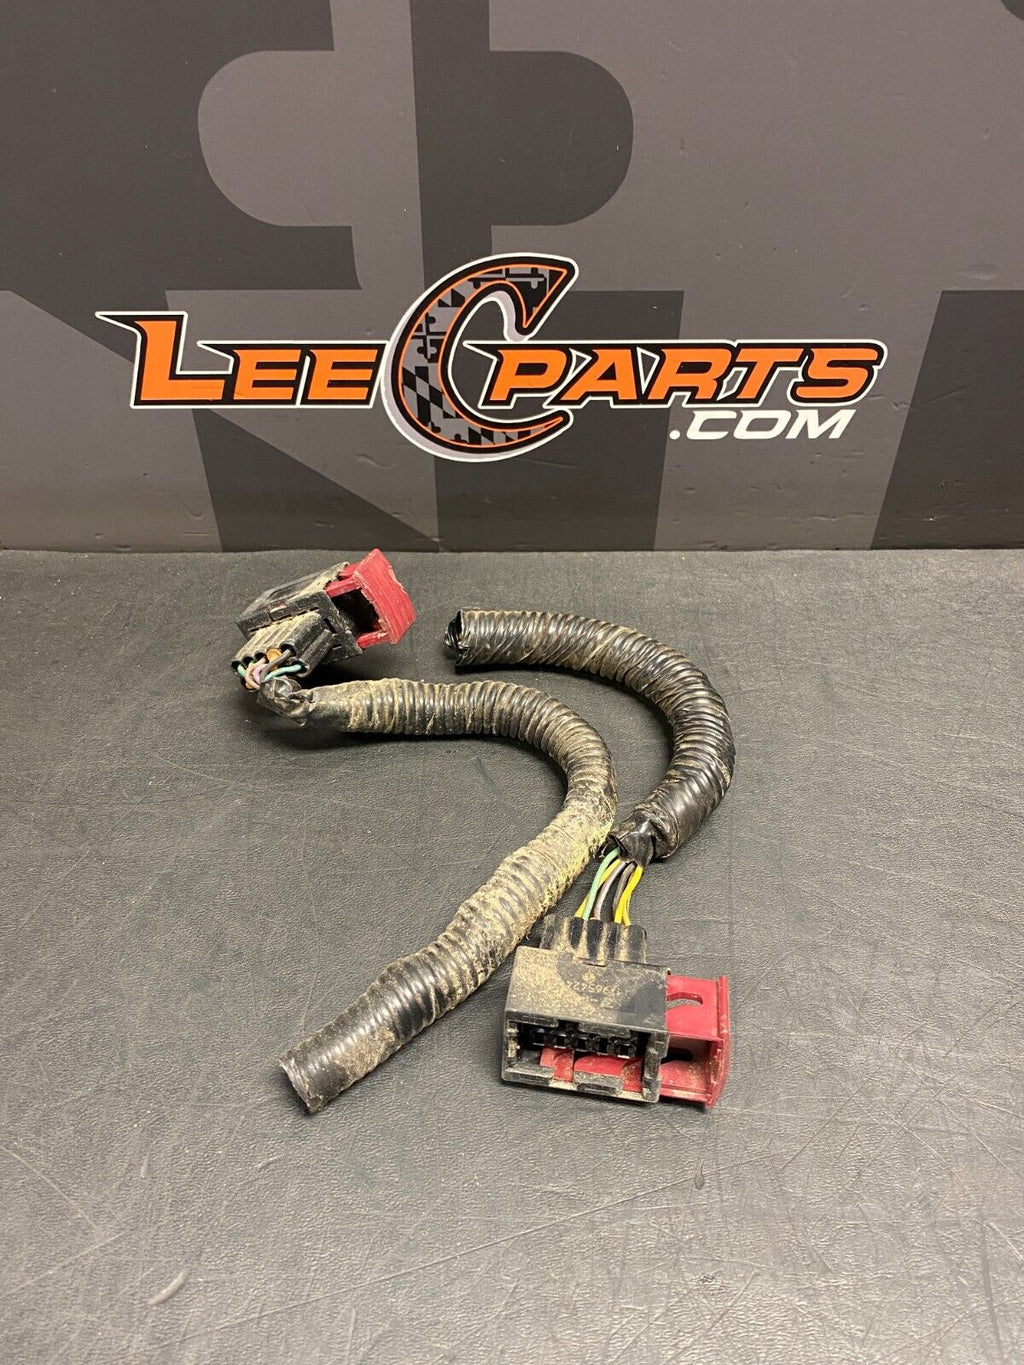 2014 CHEVROLET CAMARO SS OEM LED TAIL LIGHT WIRING HARNESS PIGTAIL CUTS USED